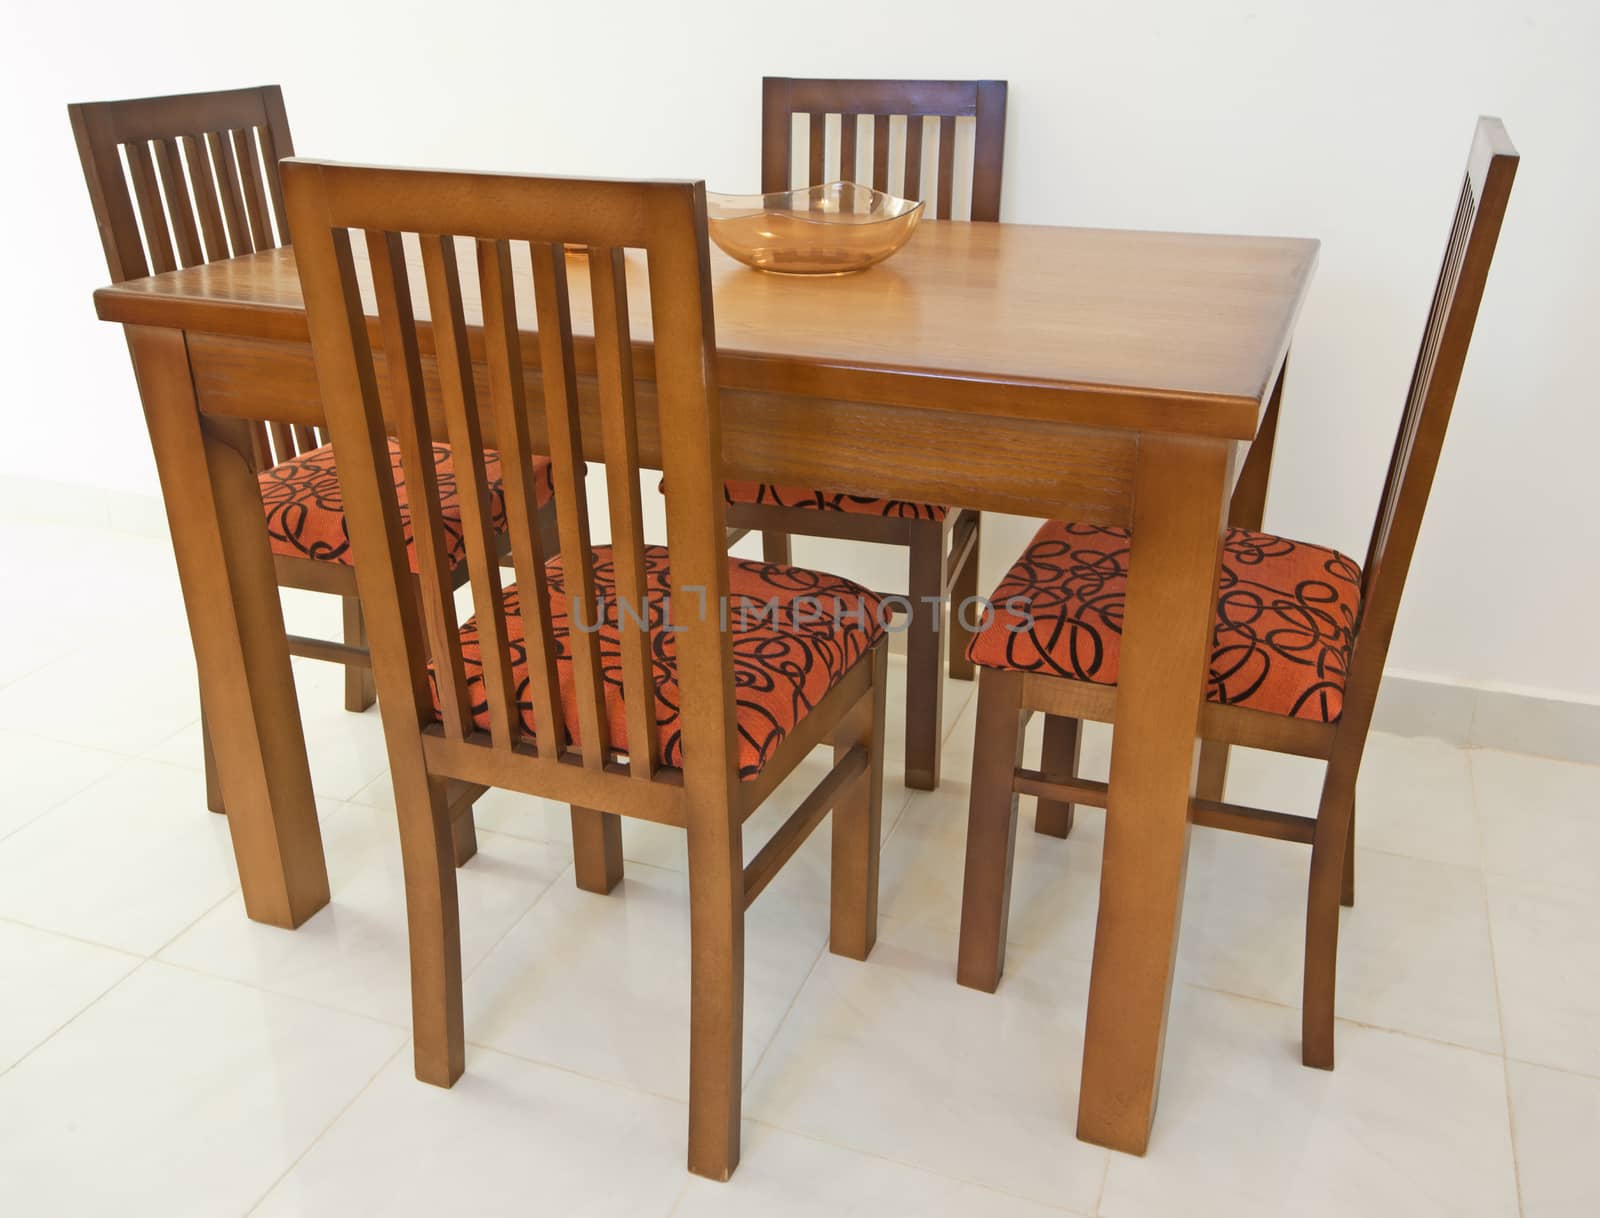 Dining table and four chairs in an apartment against white wall